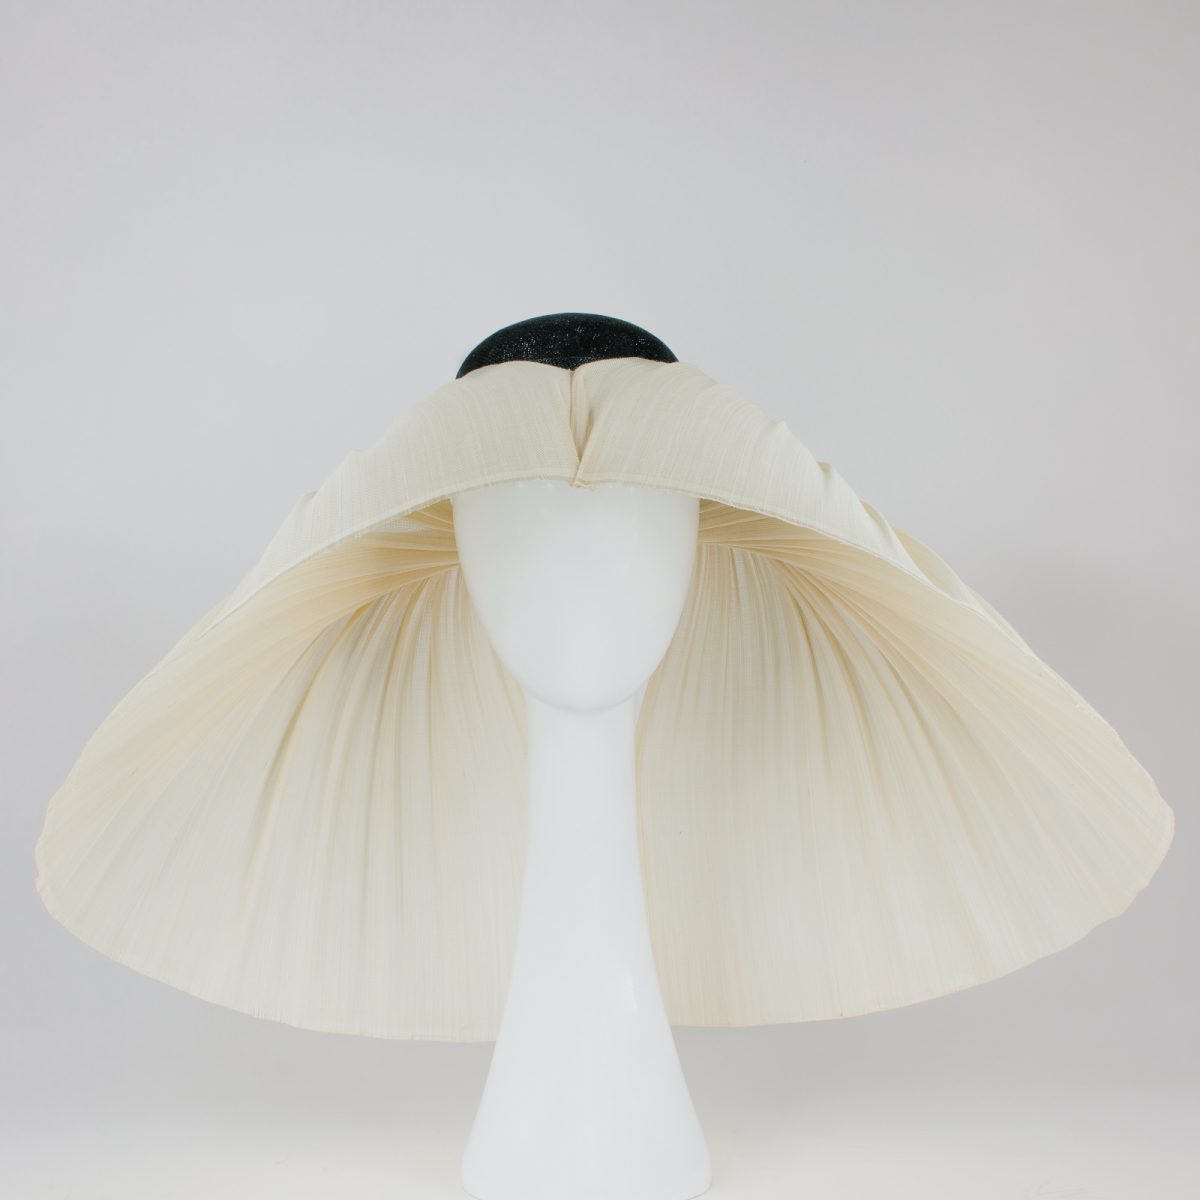 melbourne-millinery-hats-001